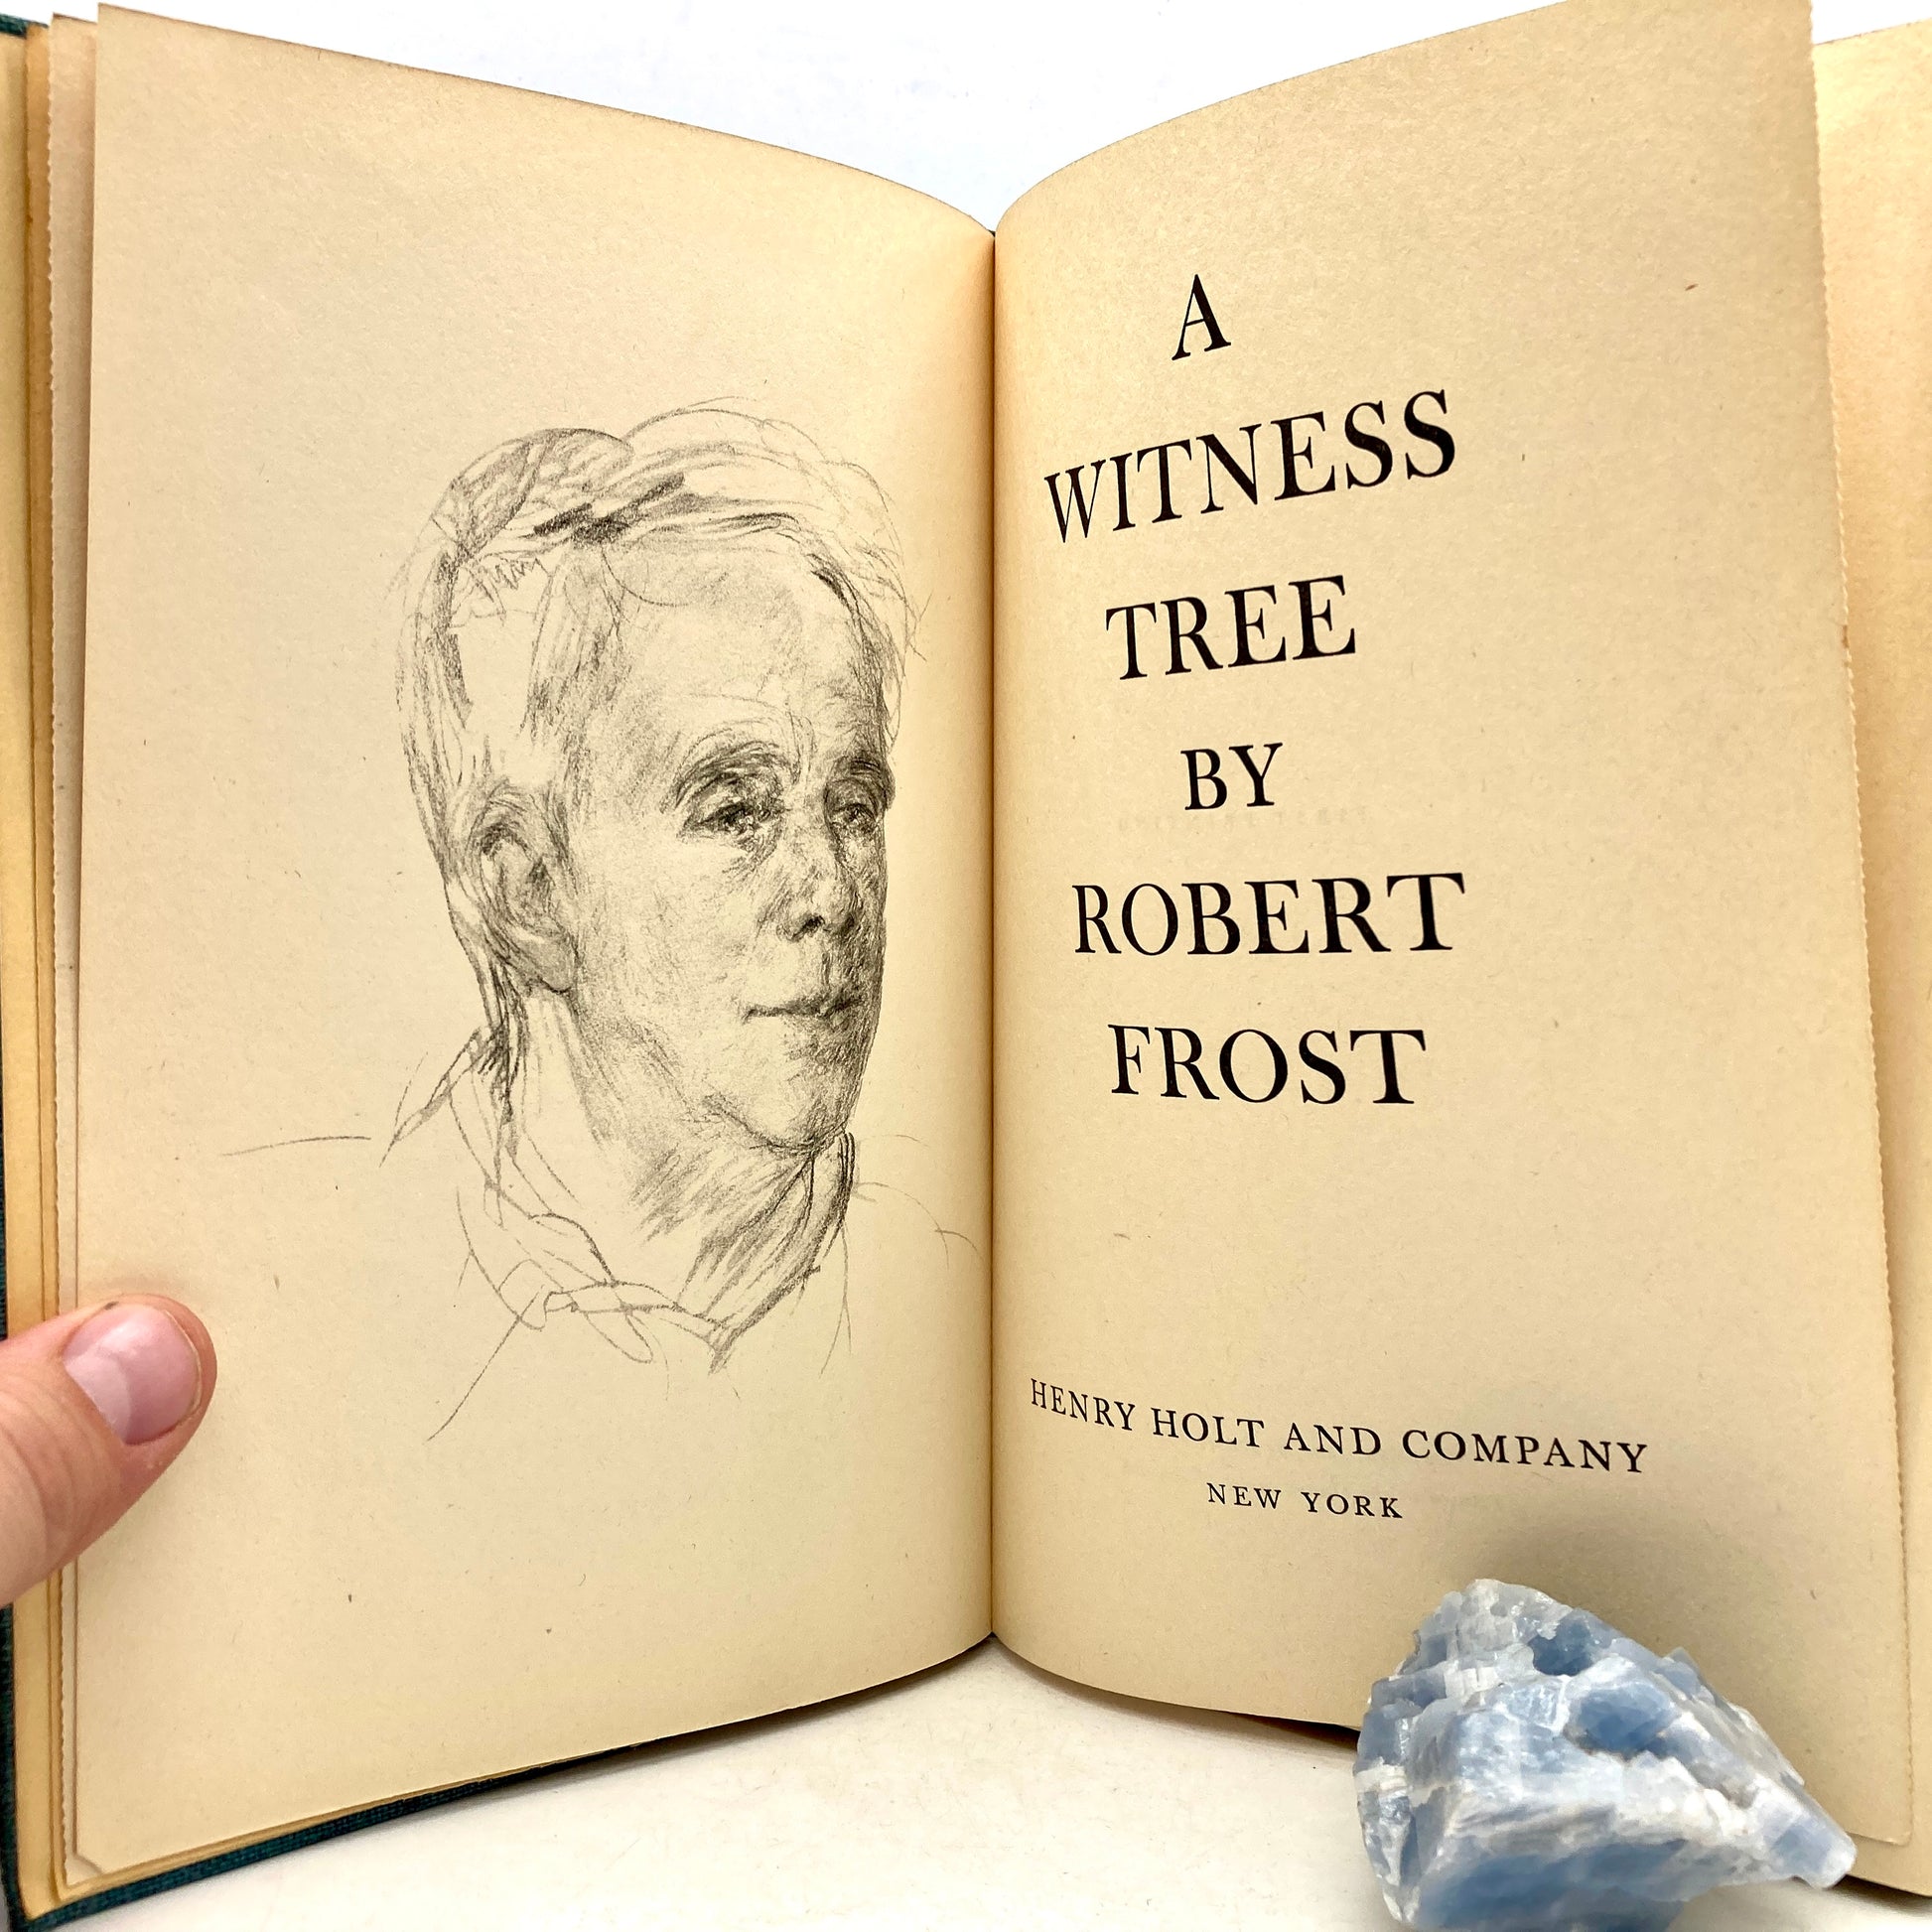 FROST, Robert "A Witness Tree" [Henry Holt, 1942] 1st Edition/1st Printing - Buzz Bookstore